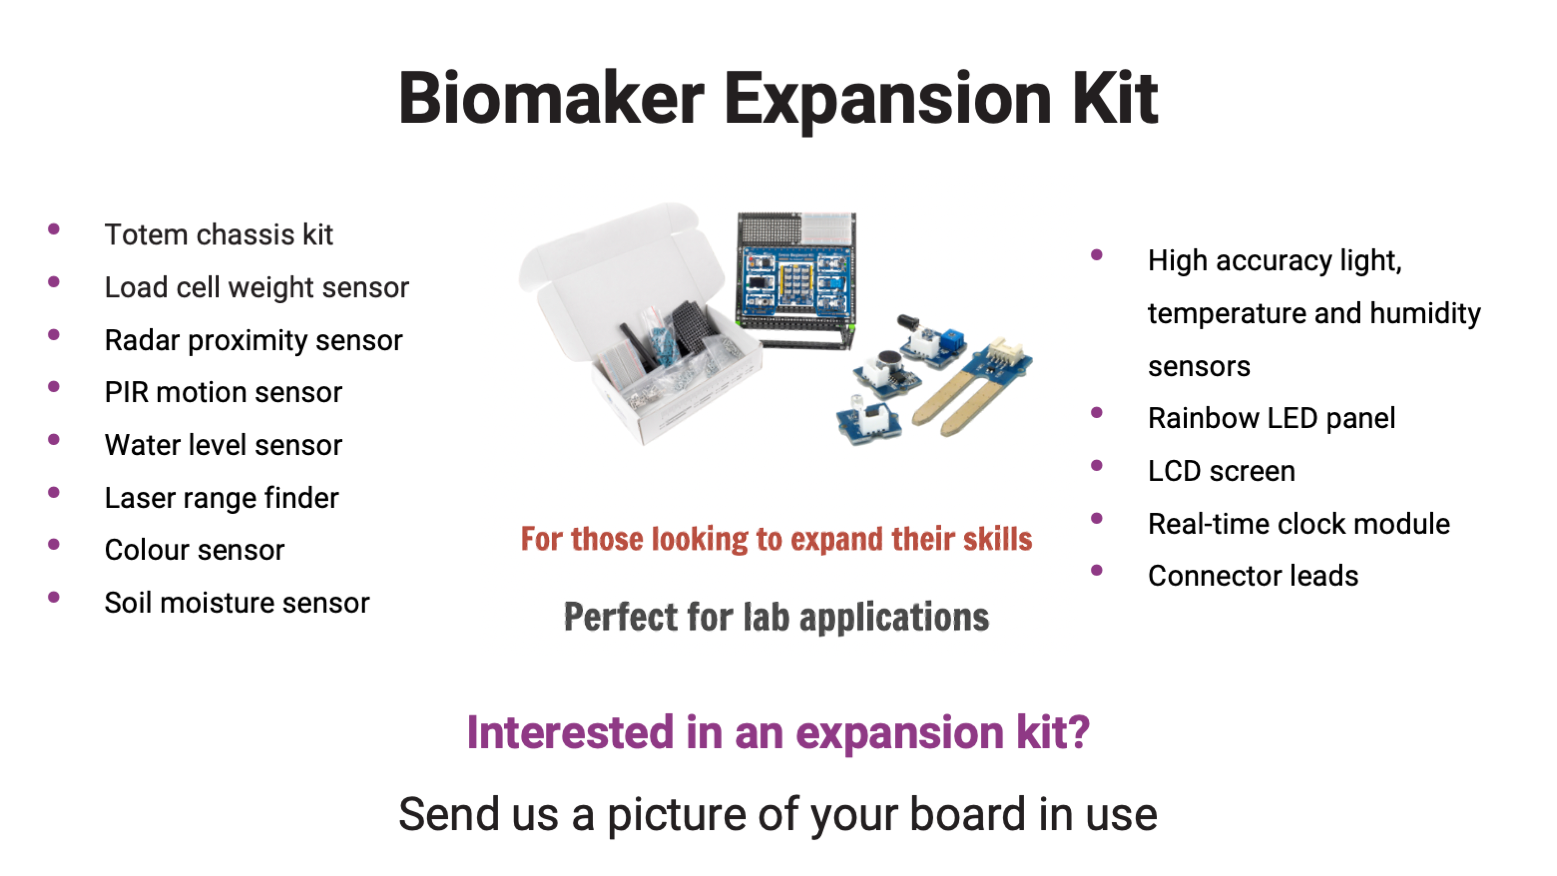 Biomaker Expansion Kit | Learn how to add new devices | Interested in an expansion kit? Send us a picture of your board in use